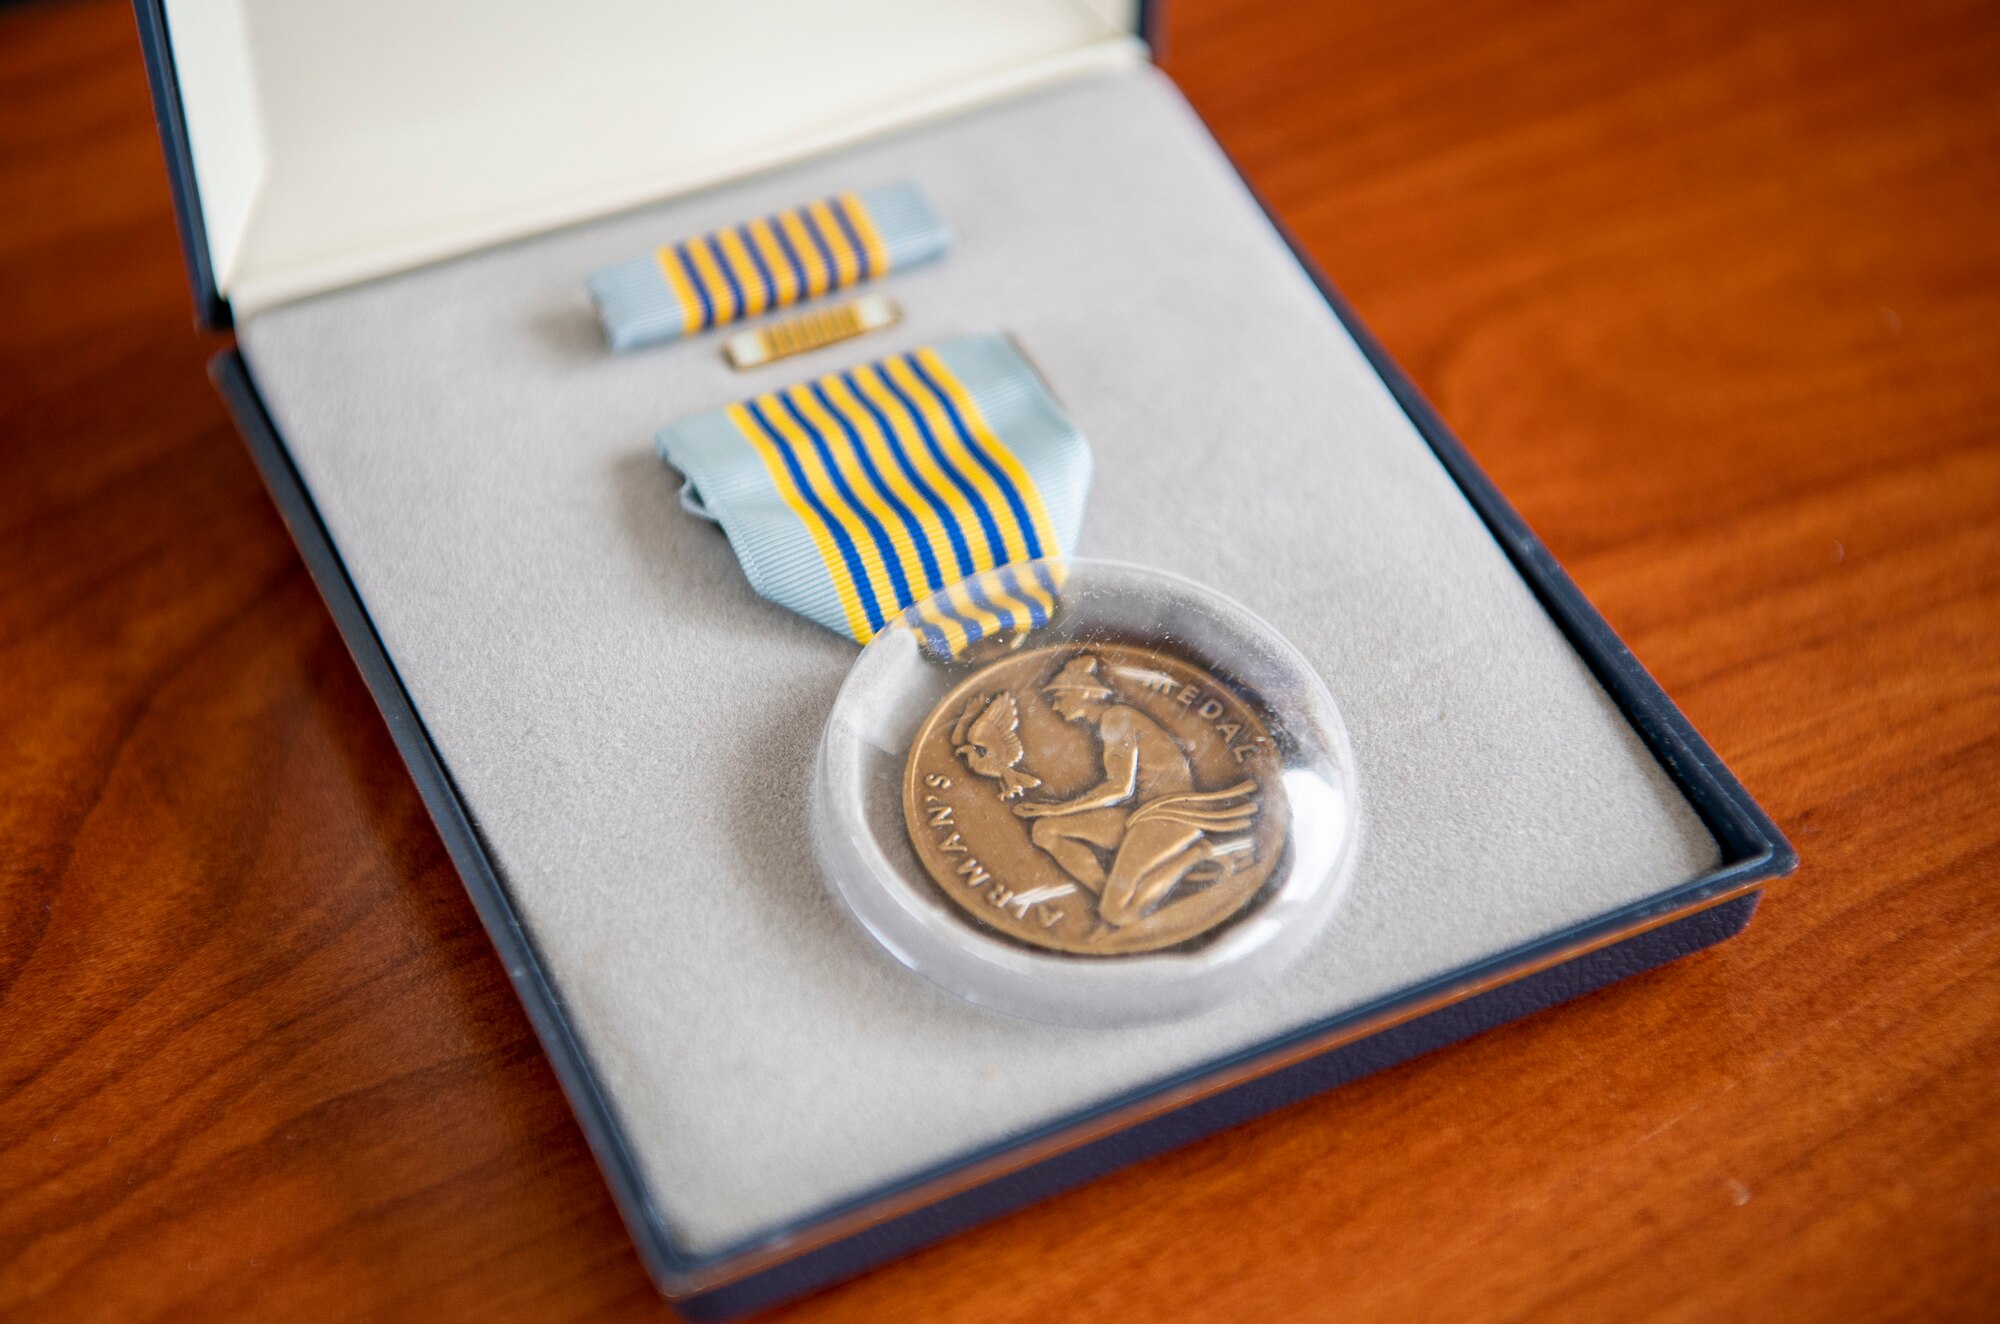 The Airman’s Medal, the highest award given to Air Force members outside combat, rests on a table before a ceremony at Coast Guard Marine Safety Security Team Houston, Texas, April 26, 2022. Air Force personnel presented the award to the family of Elijah Posana, an airman who gave his life rescuing his cousins from a rip current on Surfside Beach, Texas, May 2, 2021. (U.S. Coast Guard photo by Petty Officer 1st Class Corinne Zilnicki)